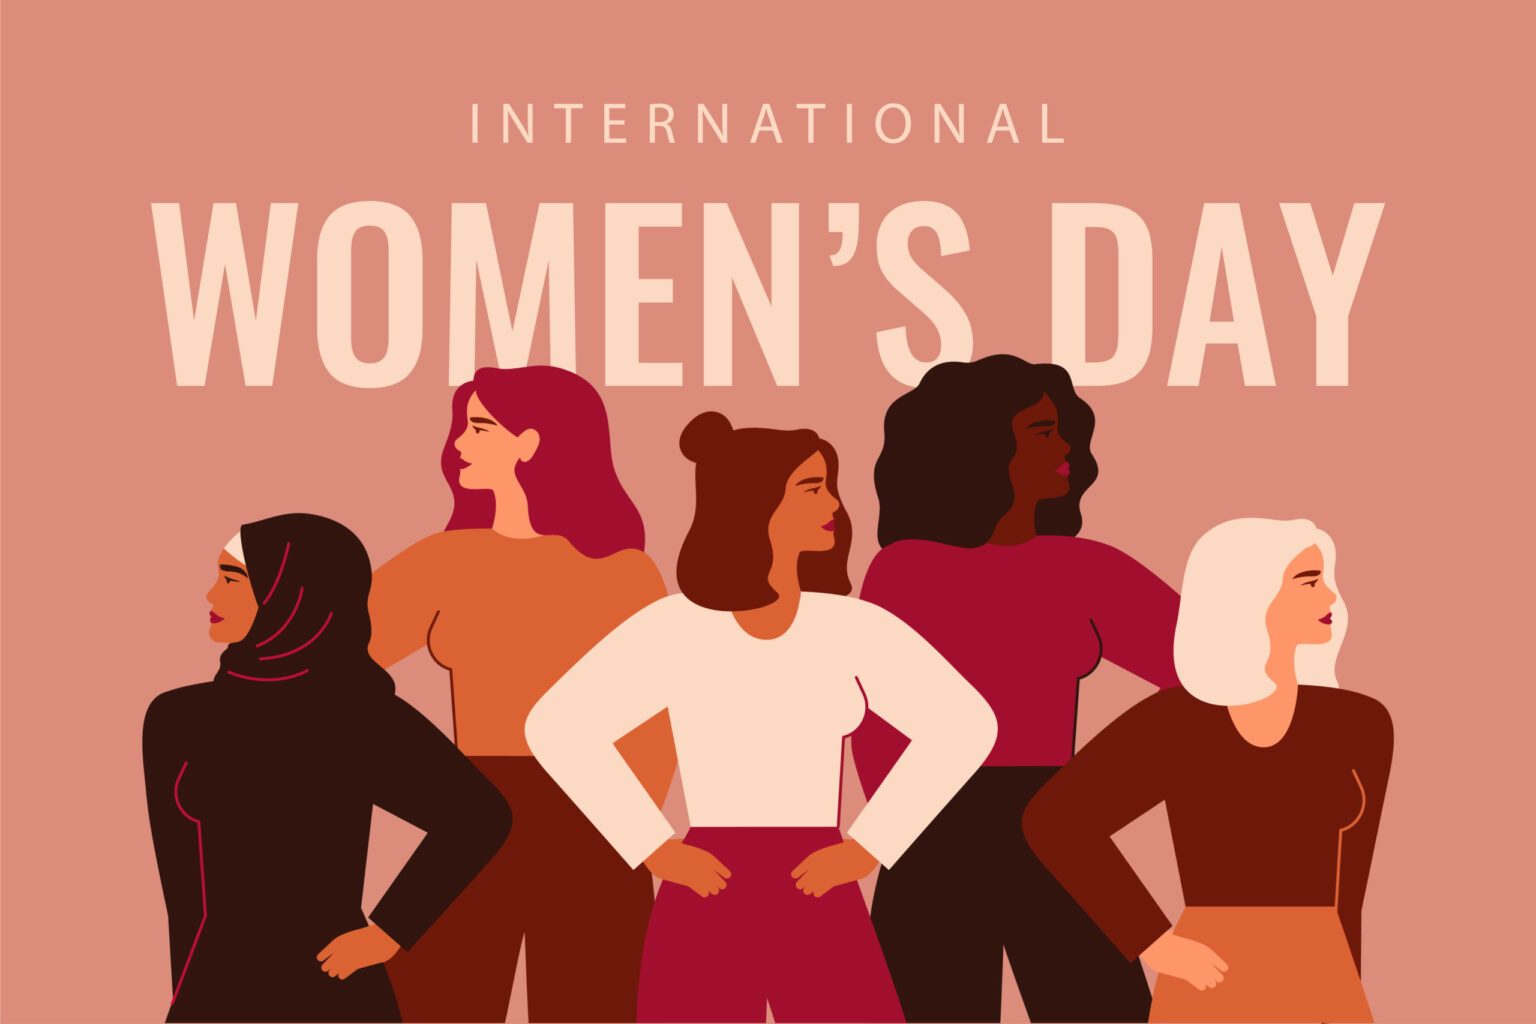 International Women's Day card with Five strong girls of different cultures and ethnicities stand together. Vector concept of gender equality and of the female empowerment movement.